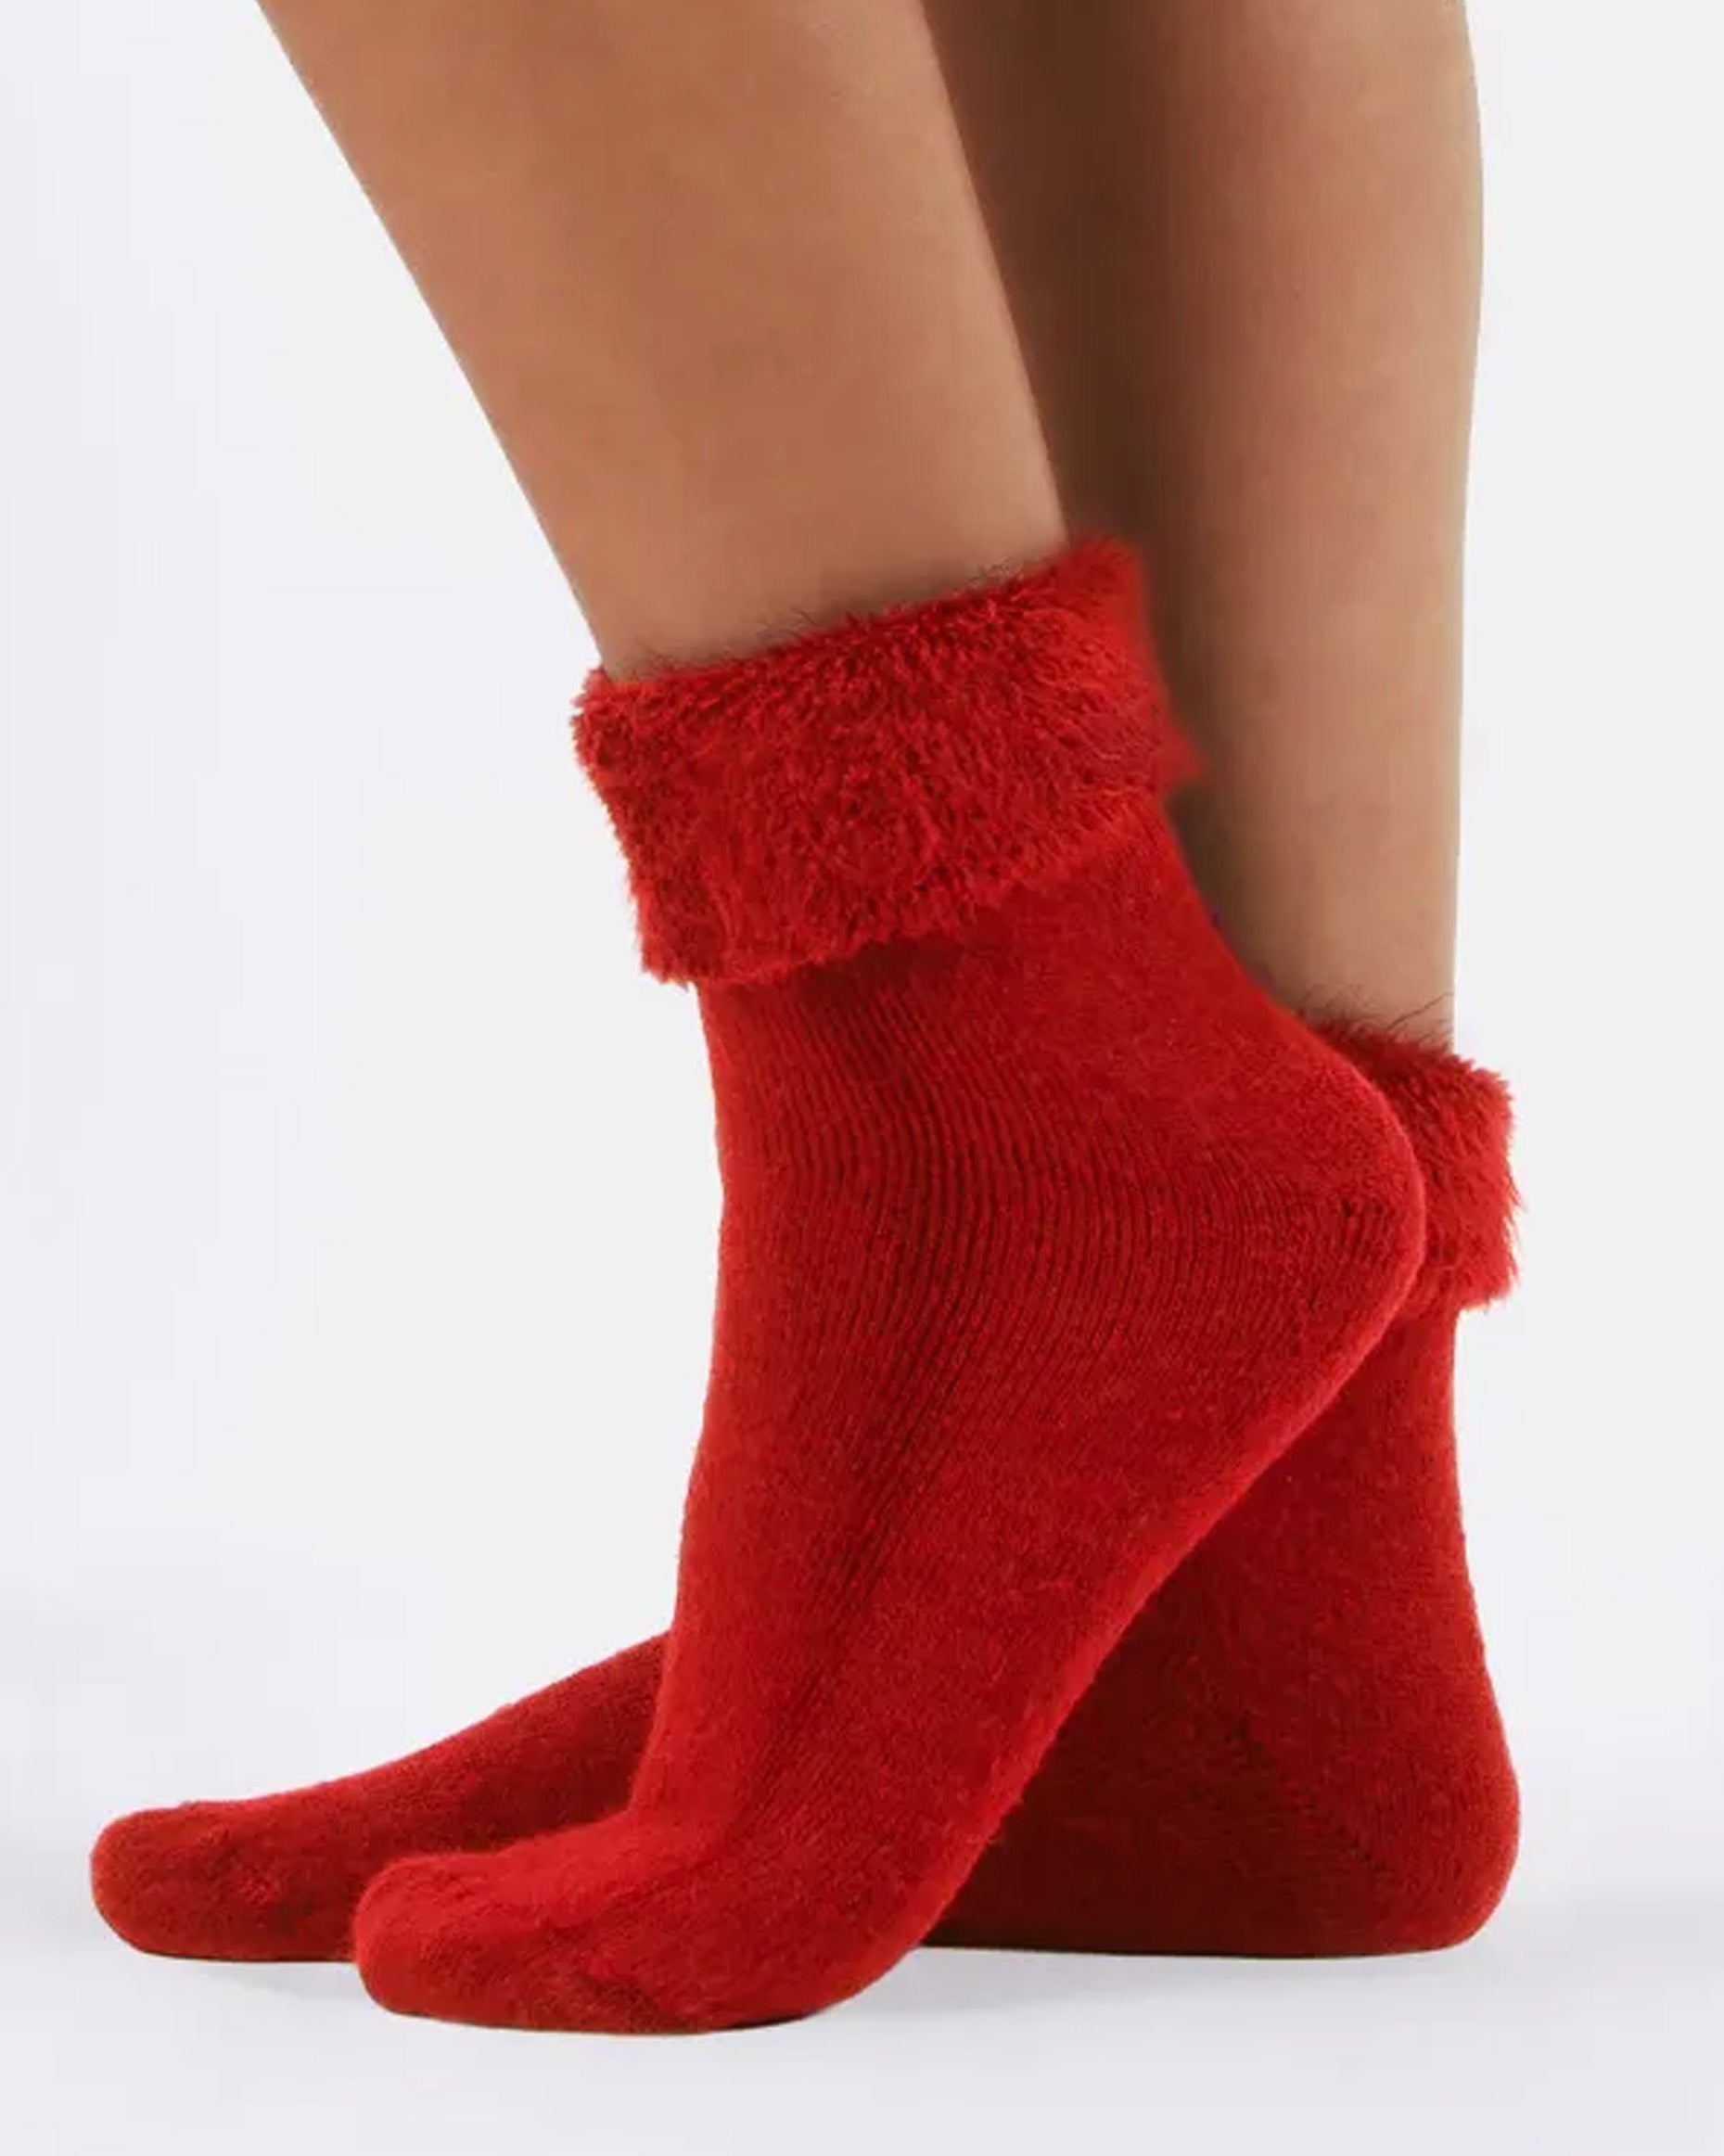 Calzitaly Angora Touch Socks - Red thick and warm acrylic socks with a fluffy angora type terry lining with a turned down cuff.